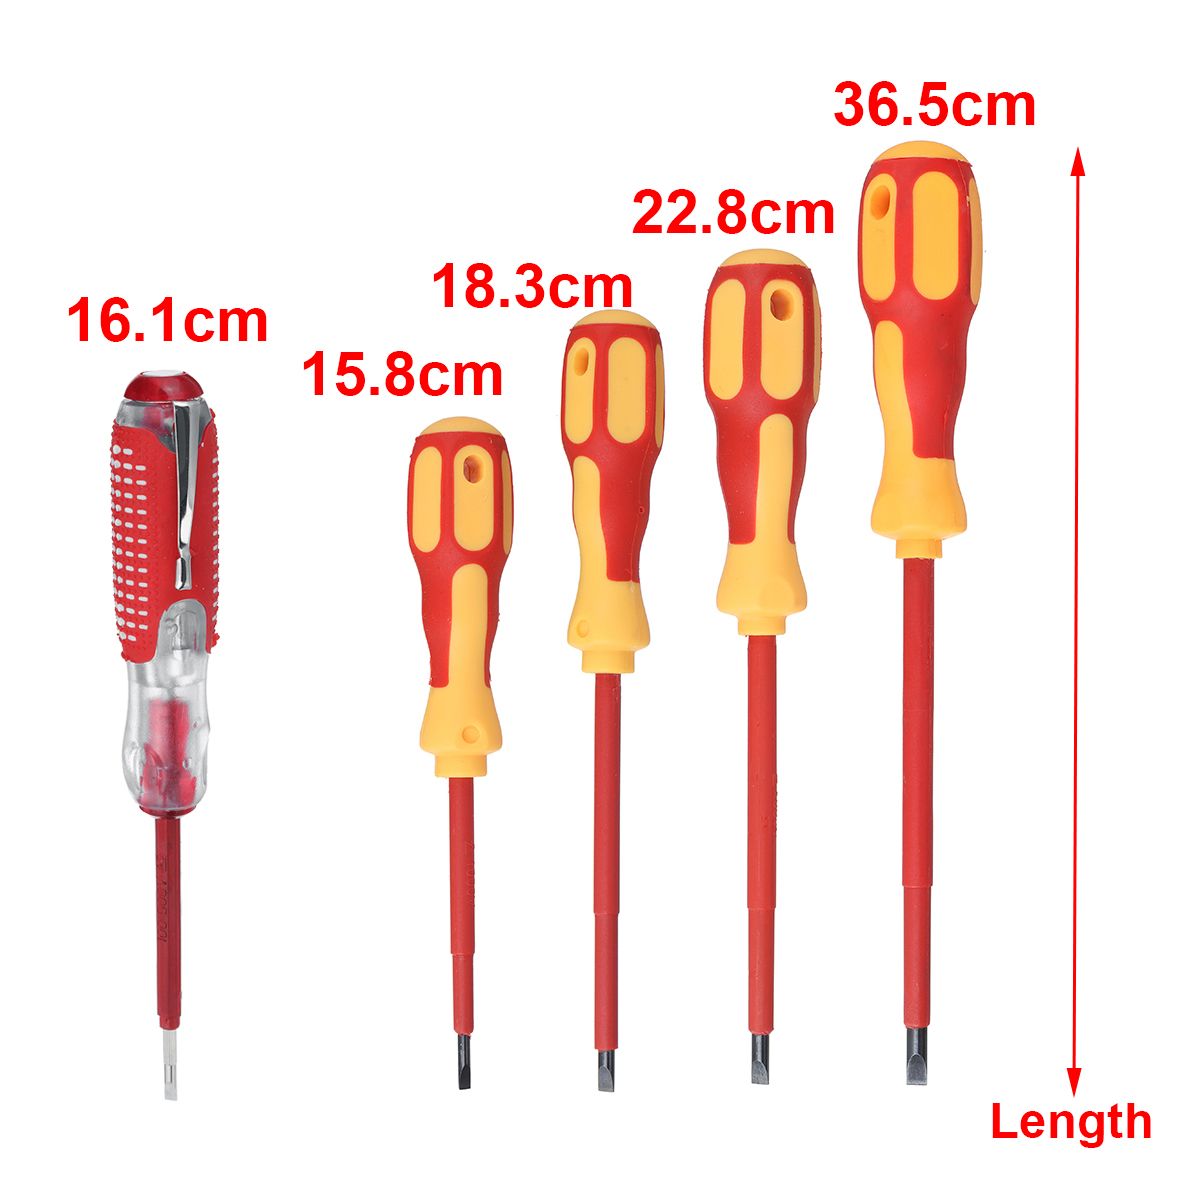 9Pcs-Electricians-Insulated-Magnetic-Screwdrivers-Hand-Screwdriver-Tools-Set-Multifunctional-Insulat-1652983